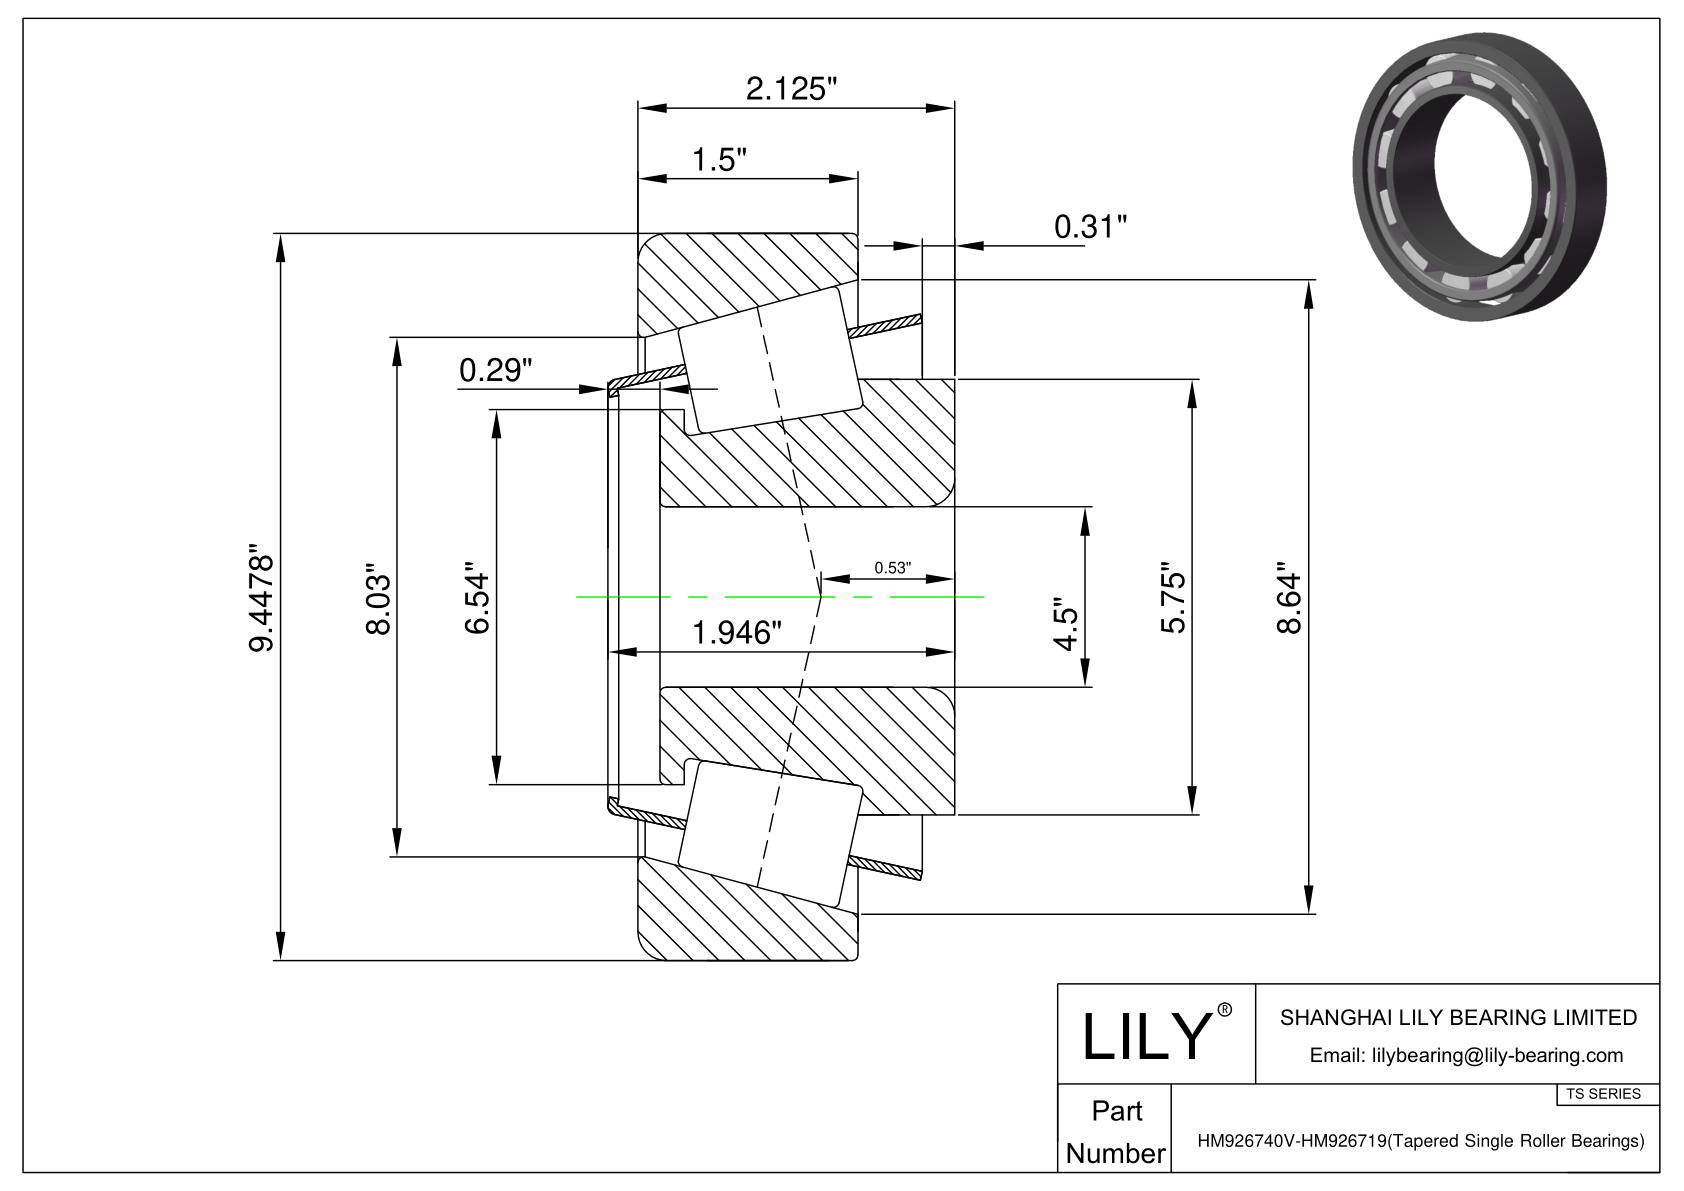 HM926740V-HM926719 TS (Tapered Single Roller Bearings) (Imperial) cad drawing